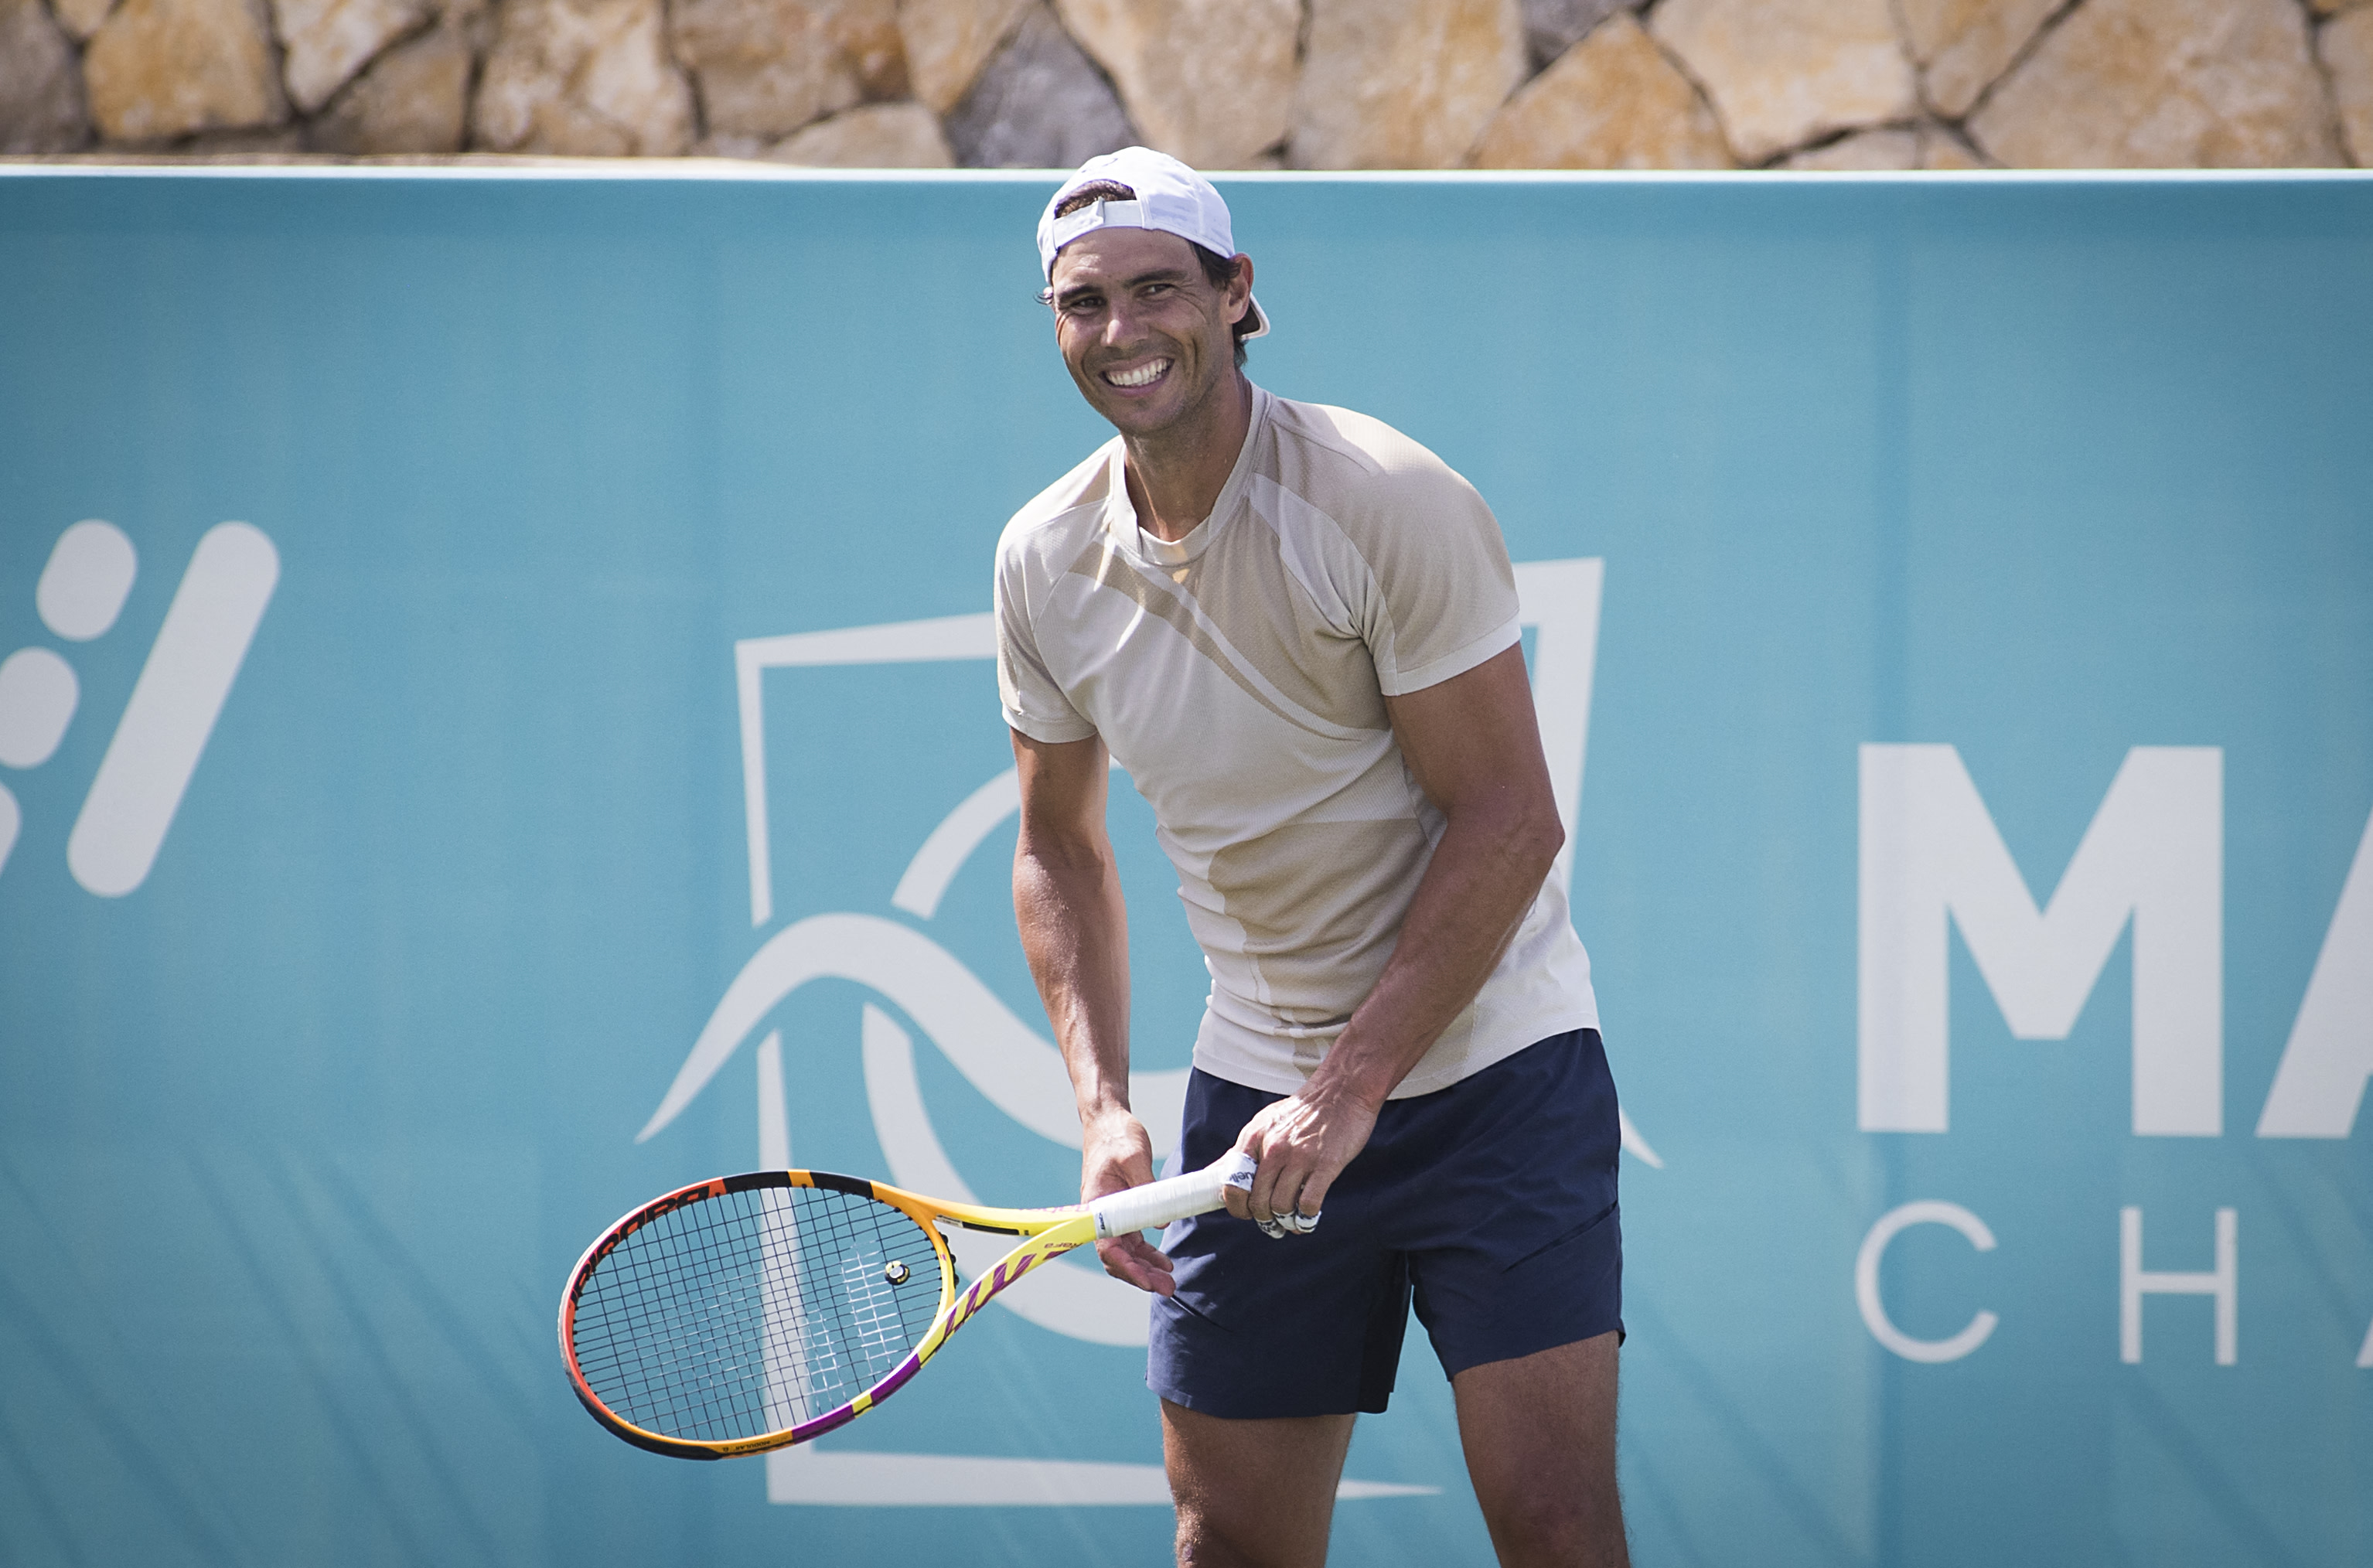 "Here I am with some positive news" Rafael Nadal intends to play